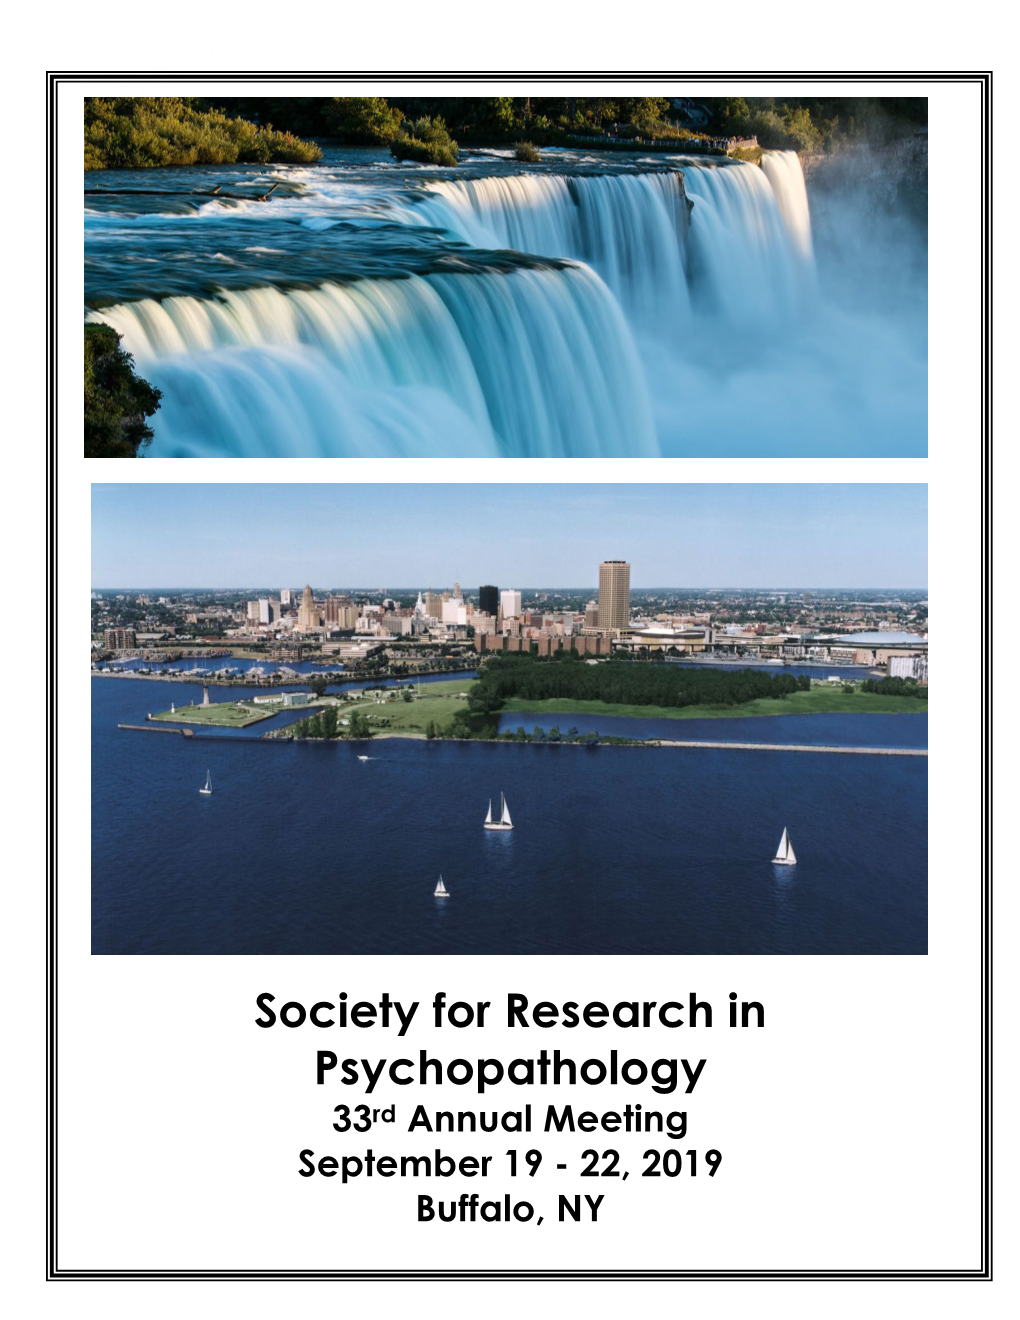 SOCIETY for RESEARCH in PSYCHOPATHOLOGY OFFICERS PRESIDENT PAST PRESIDENT James Gold, Ph.D